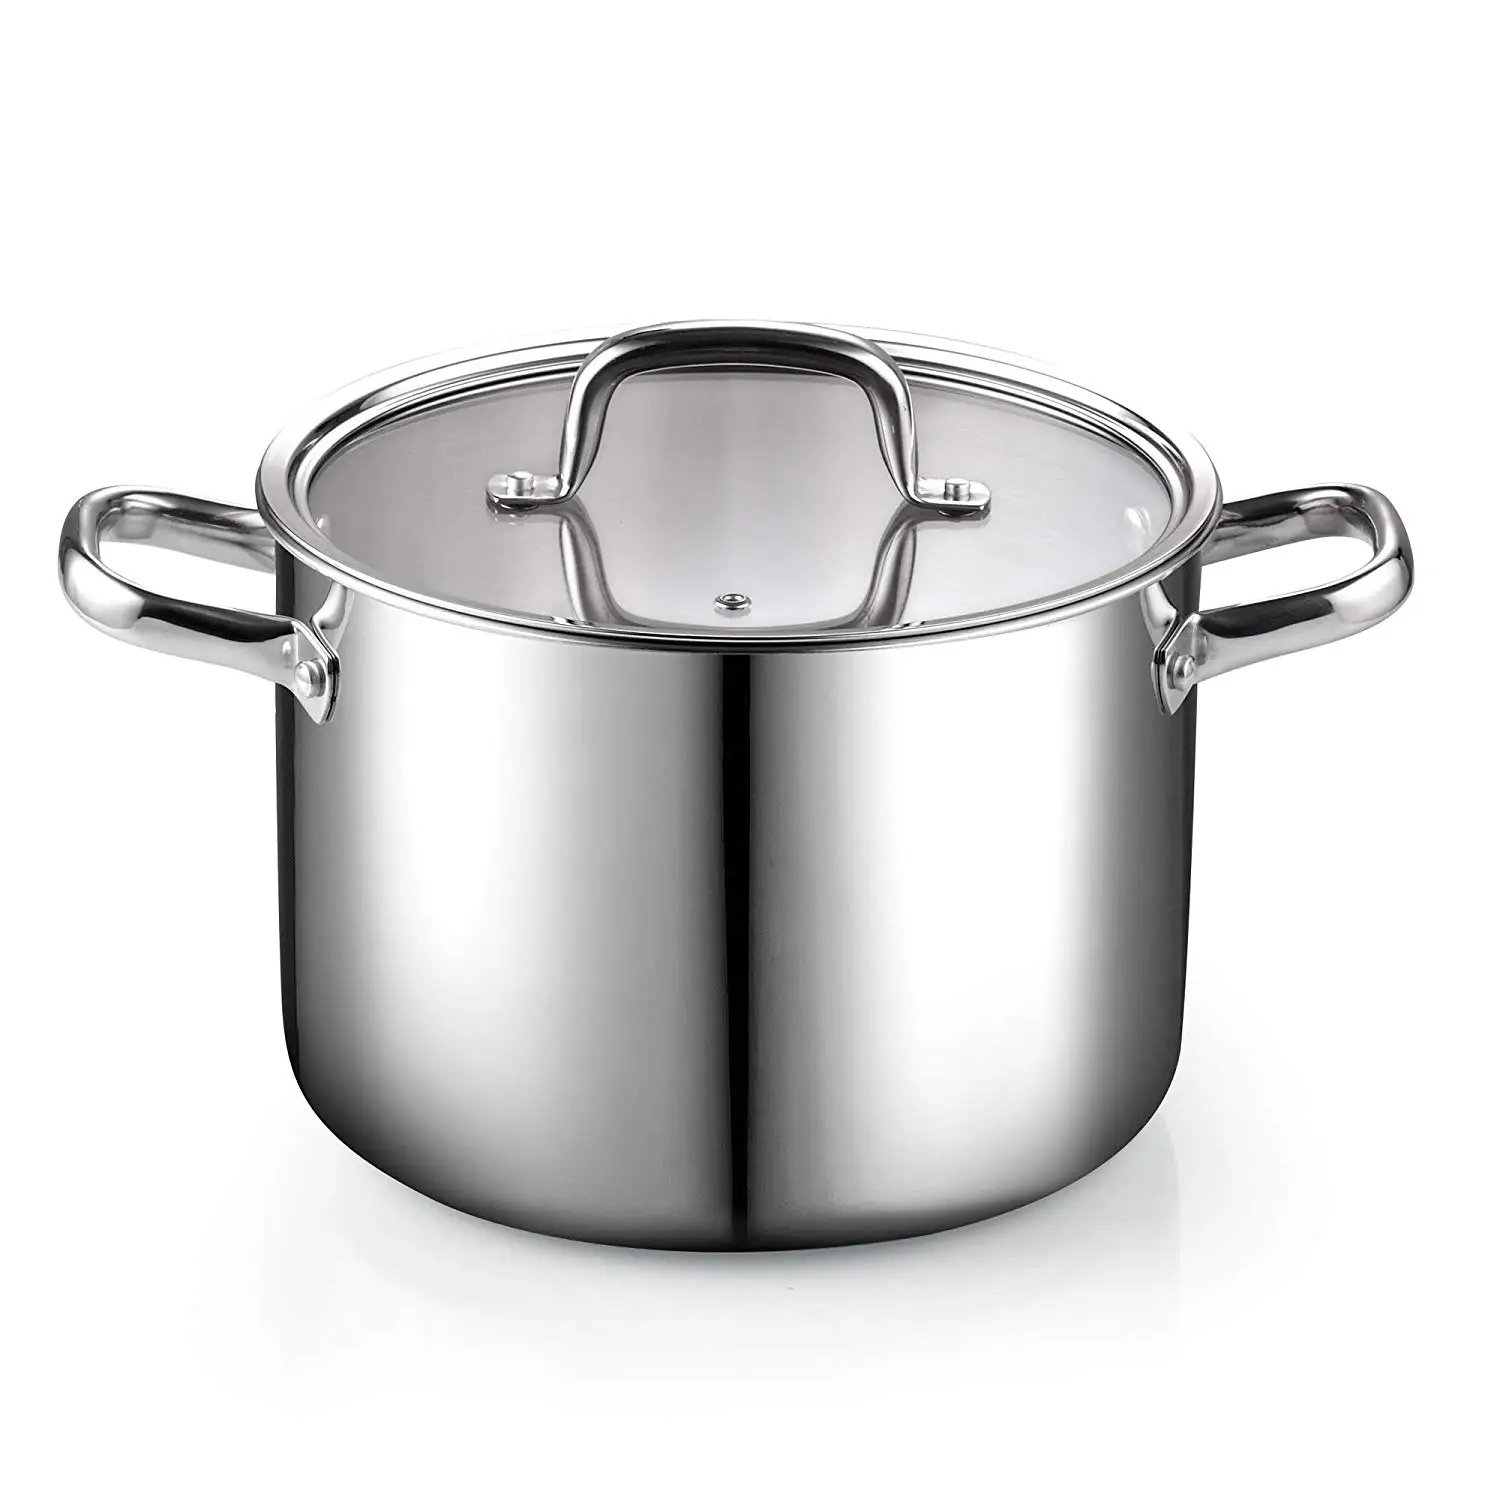 02644 7 Piece Tri-ply Clad Stainless Steel Cookware Set